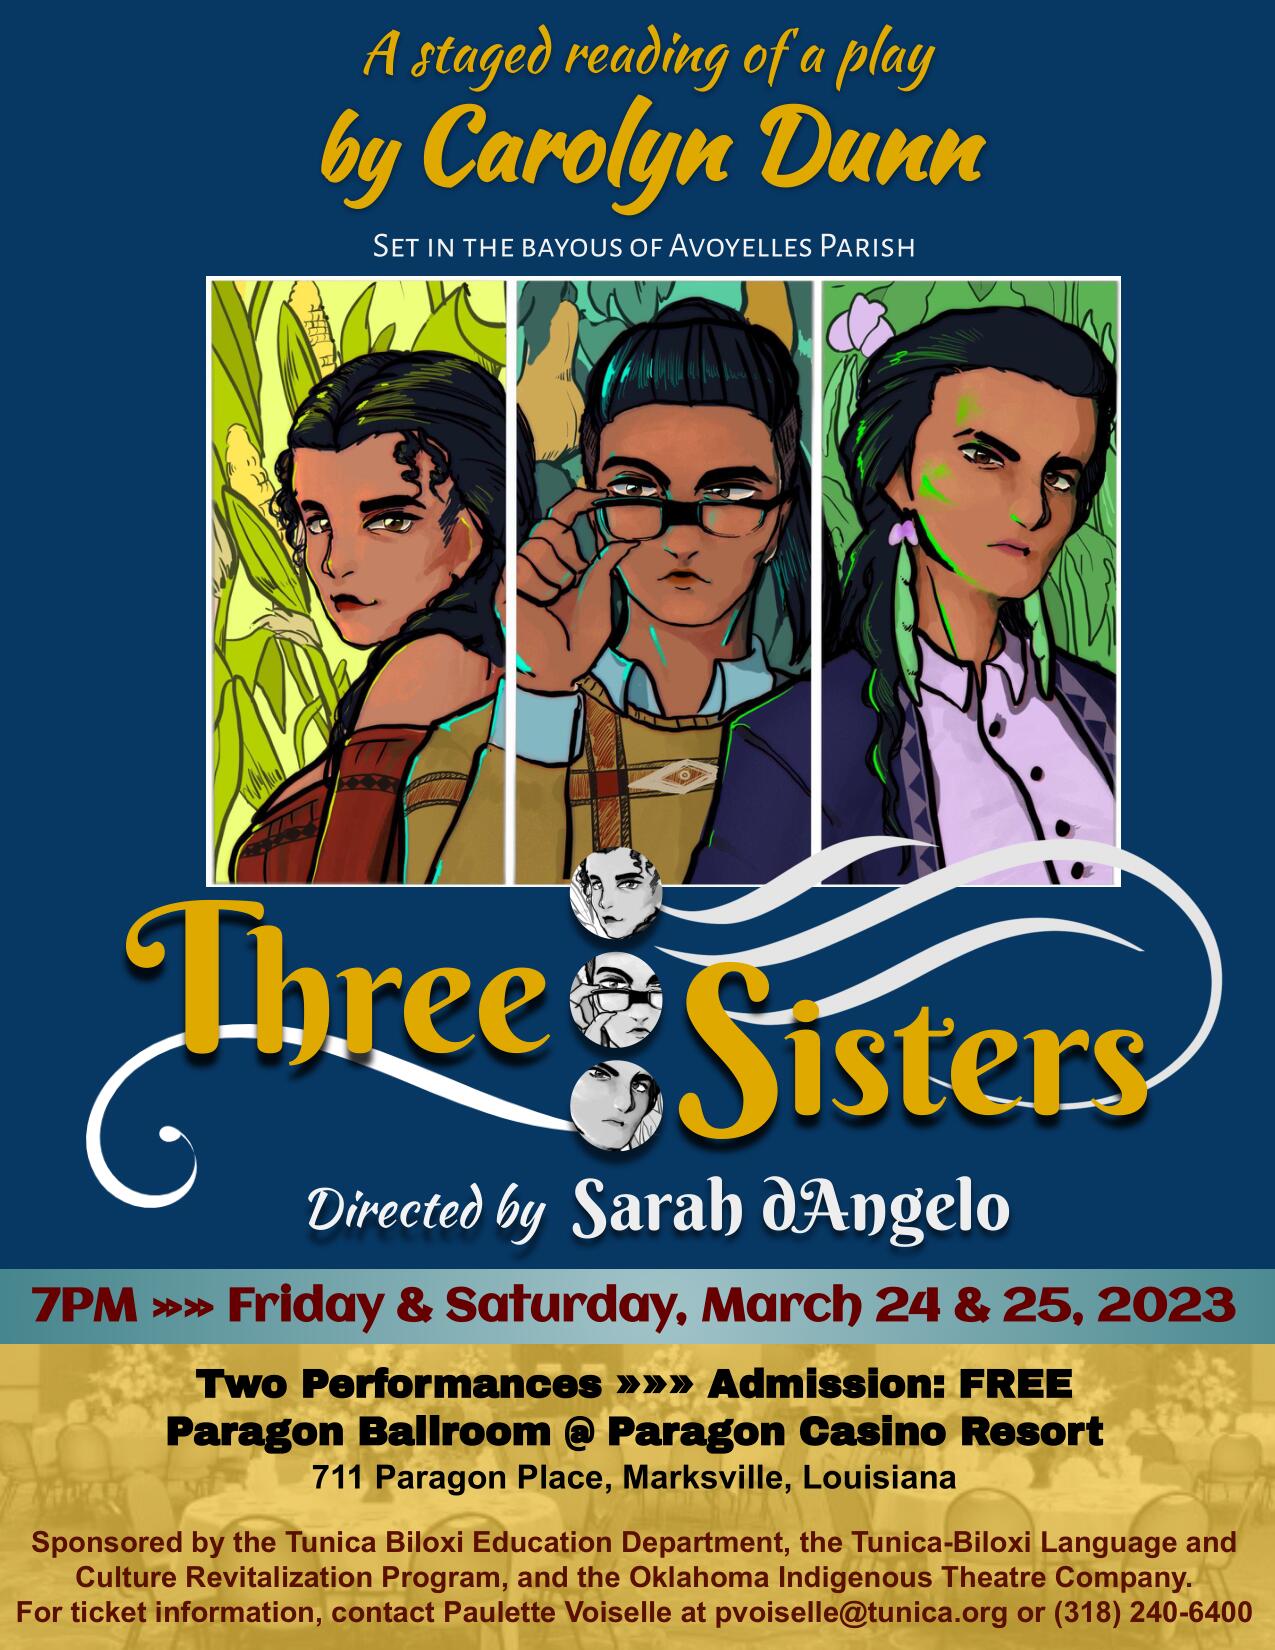 Staged Reading of Play Three Sisters, set on Tunica-Biloxi Reservation, Debuts in Avoyelles Parish